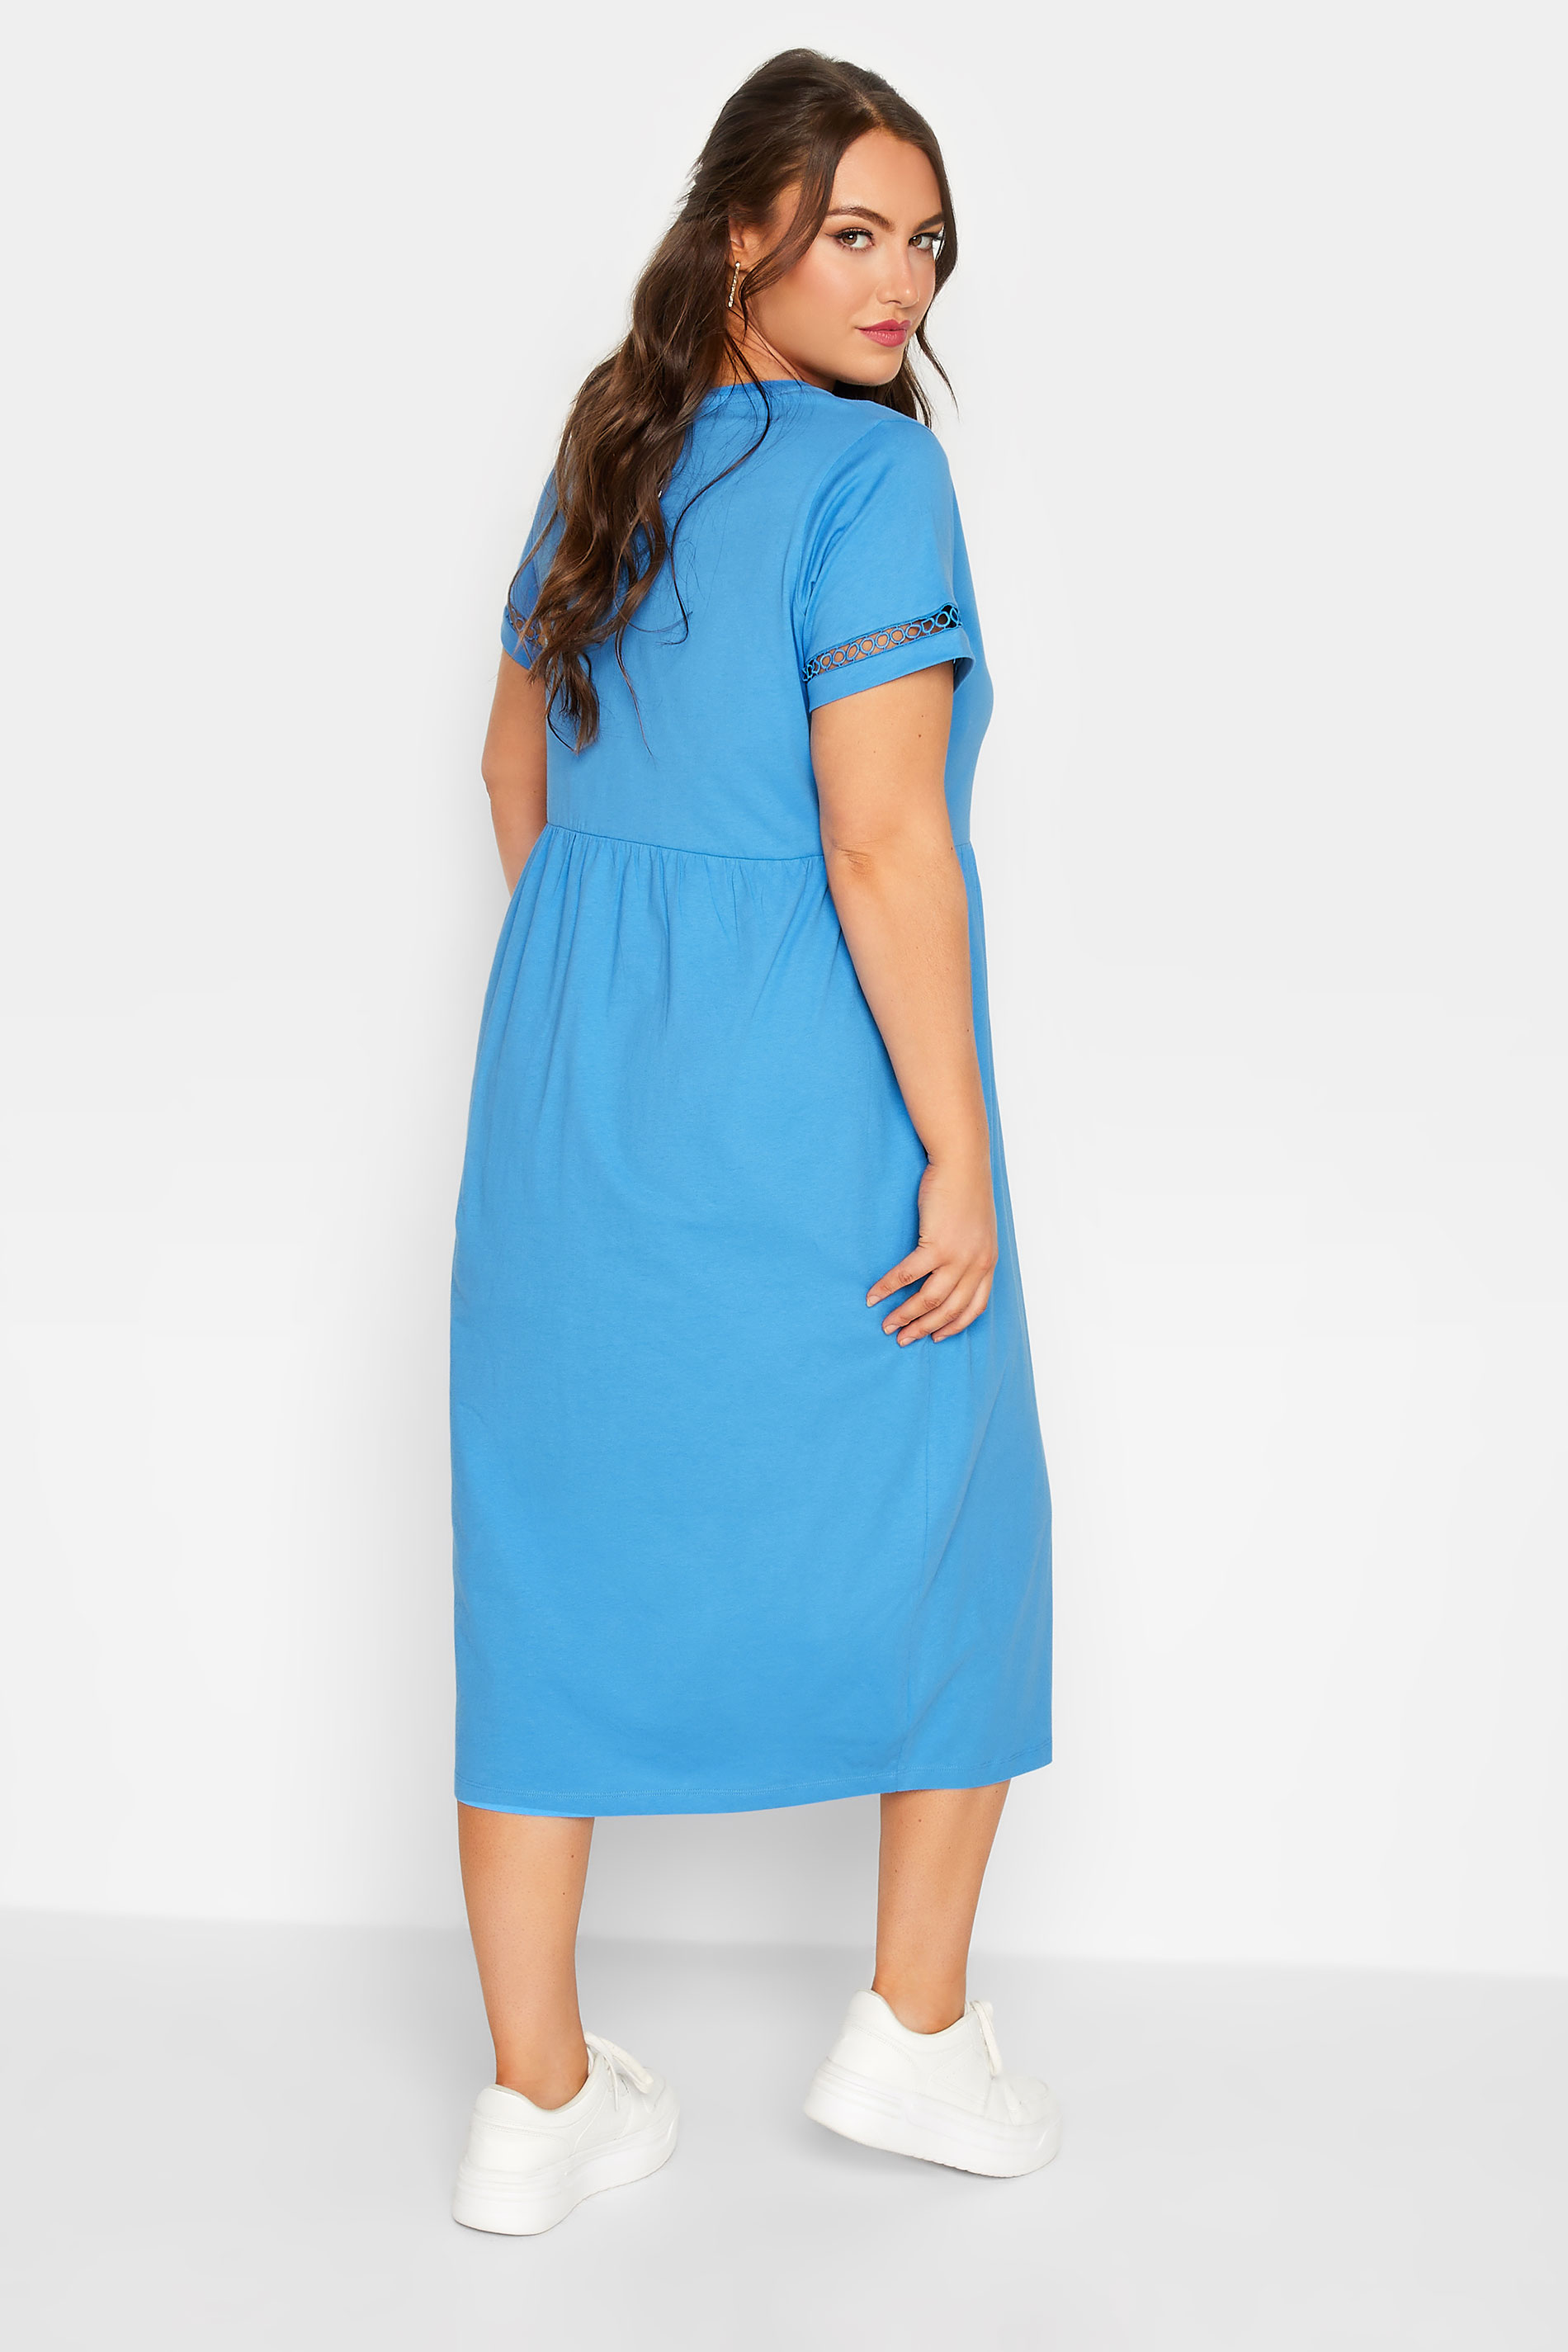 LIMITED COLLECTION Plus Size Blue Crochet Trim T-Shirt Dress | Yours Clothing 3